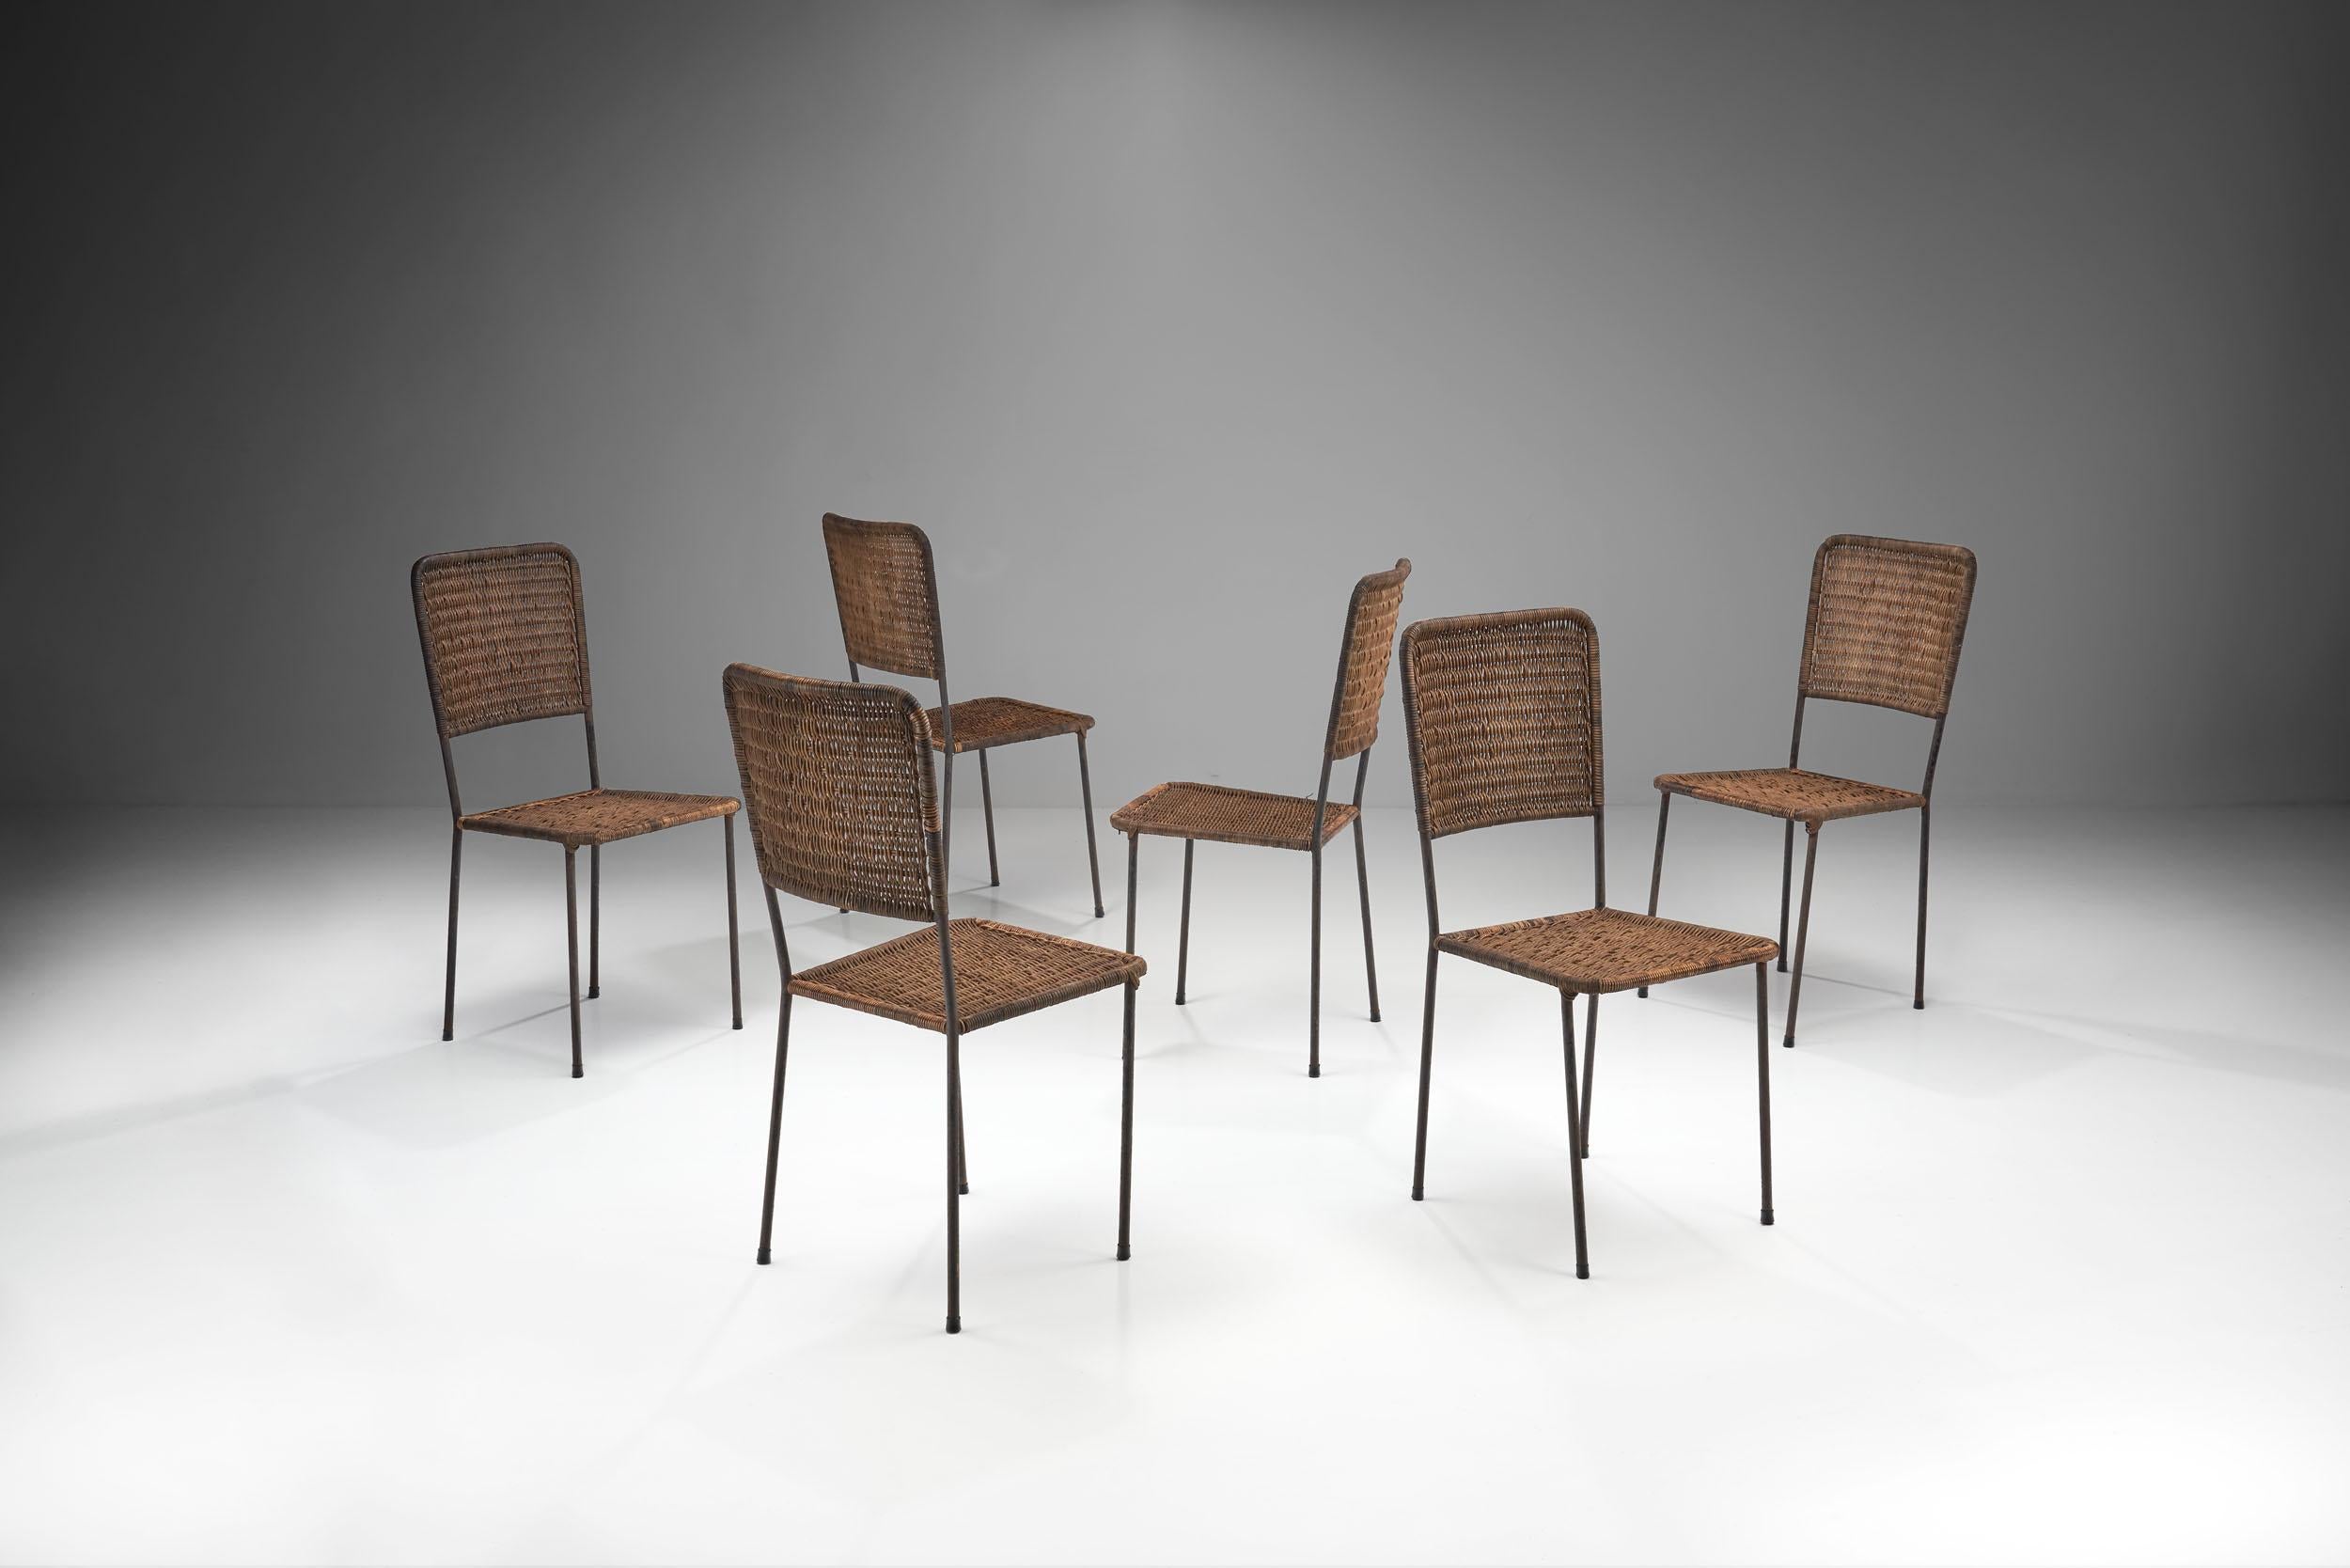 Brazilian 6 Iron and Rattan Chairs, Brazil, 1960s For Sale